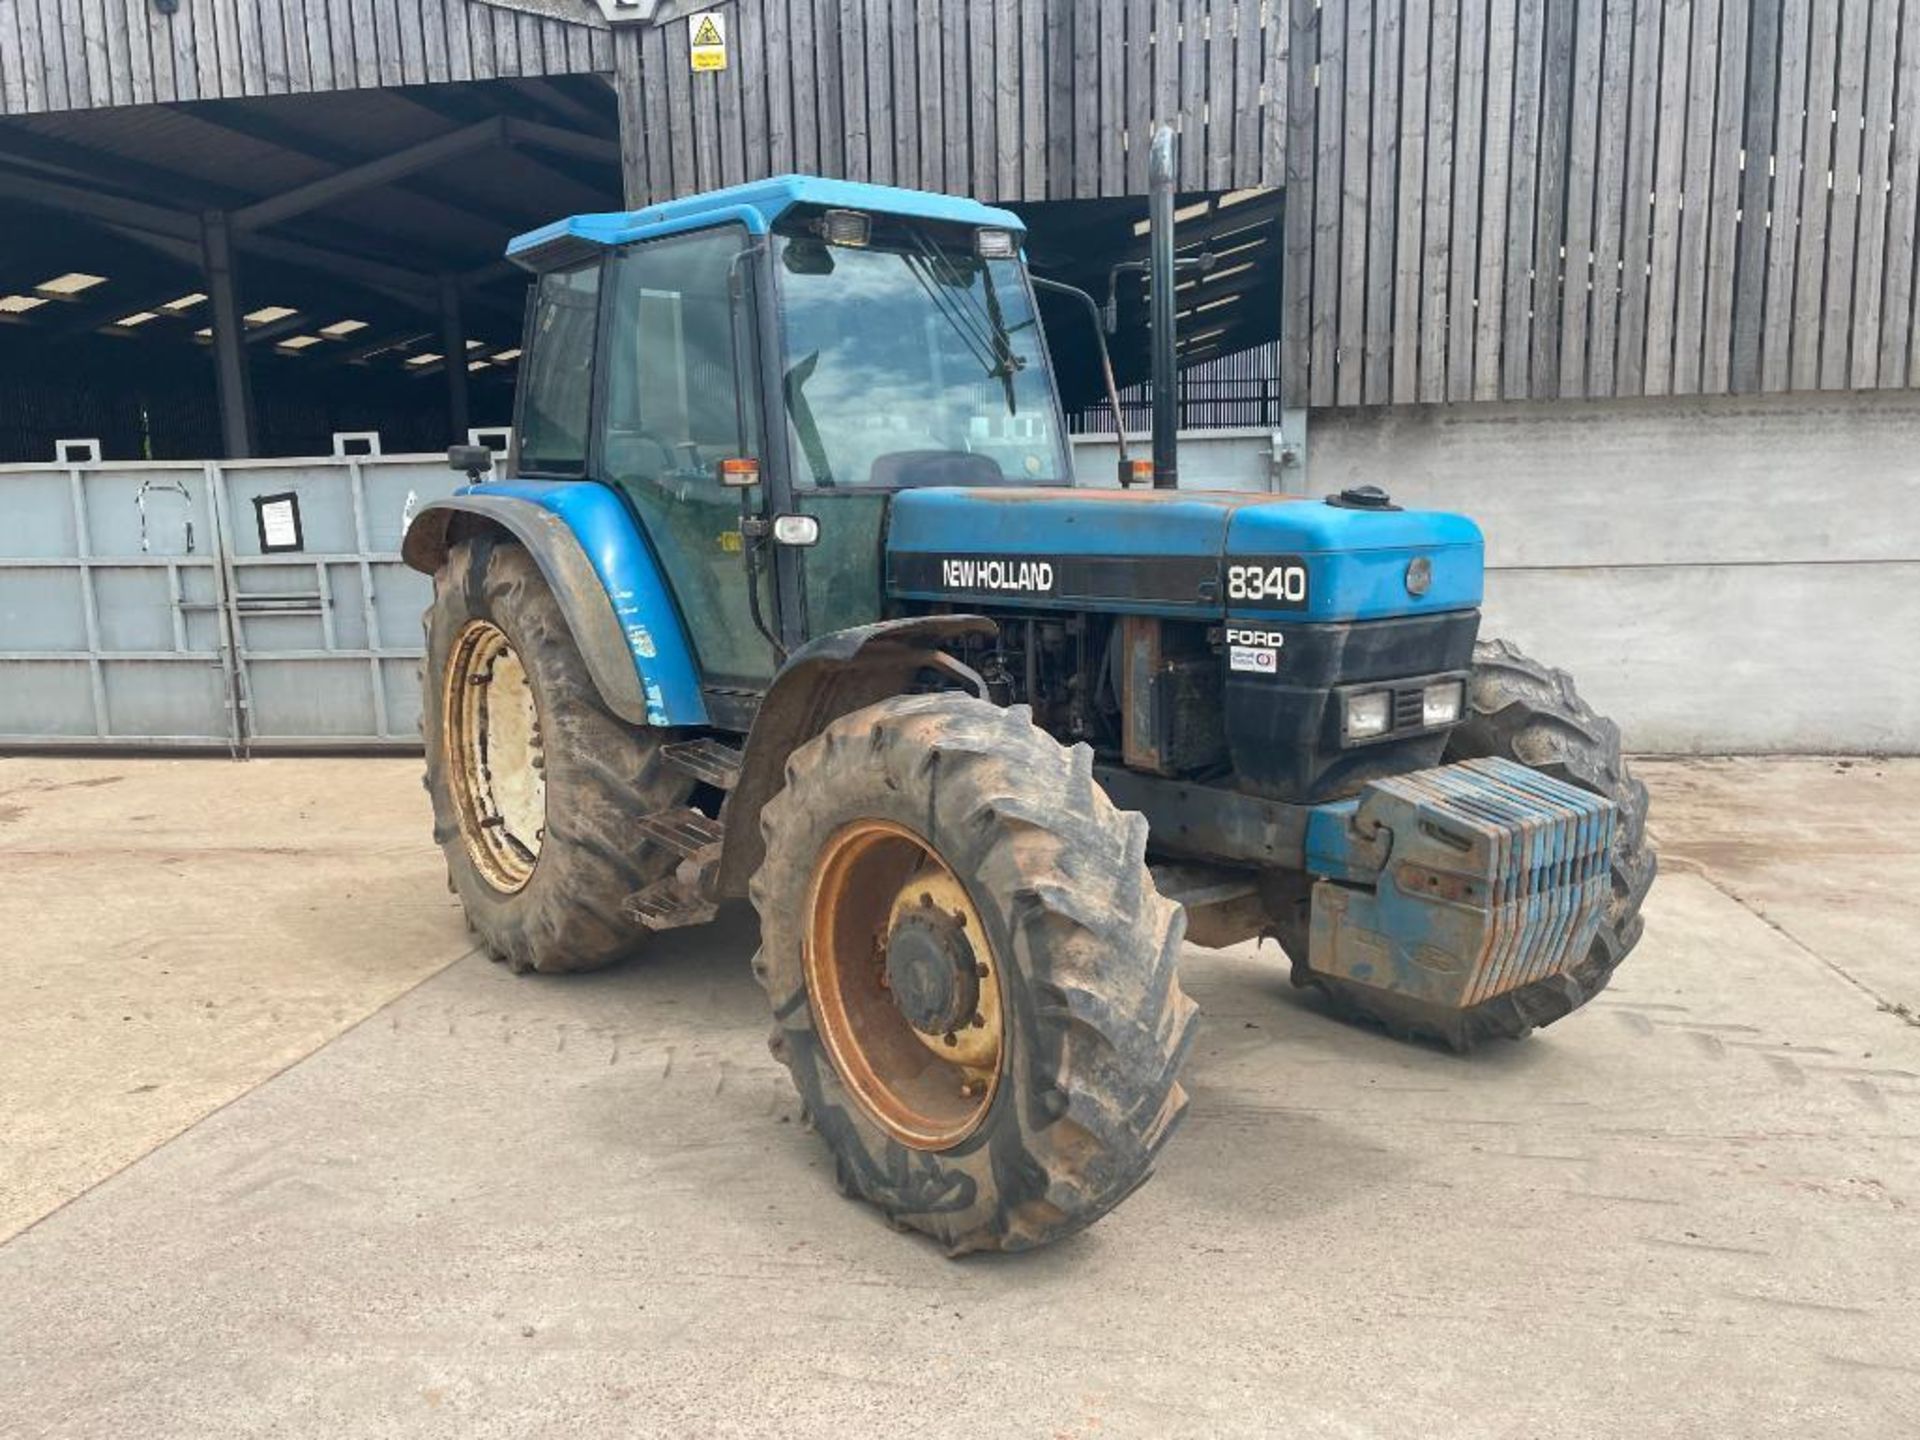 1997 New Holland 8340 4wd tractor with 2 manual spools on 14.9R28 front and 18.4R38 rear wheels and - Image 4 of 22